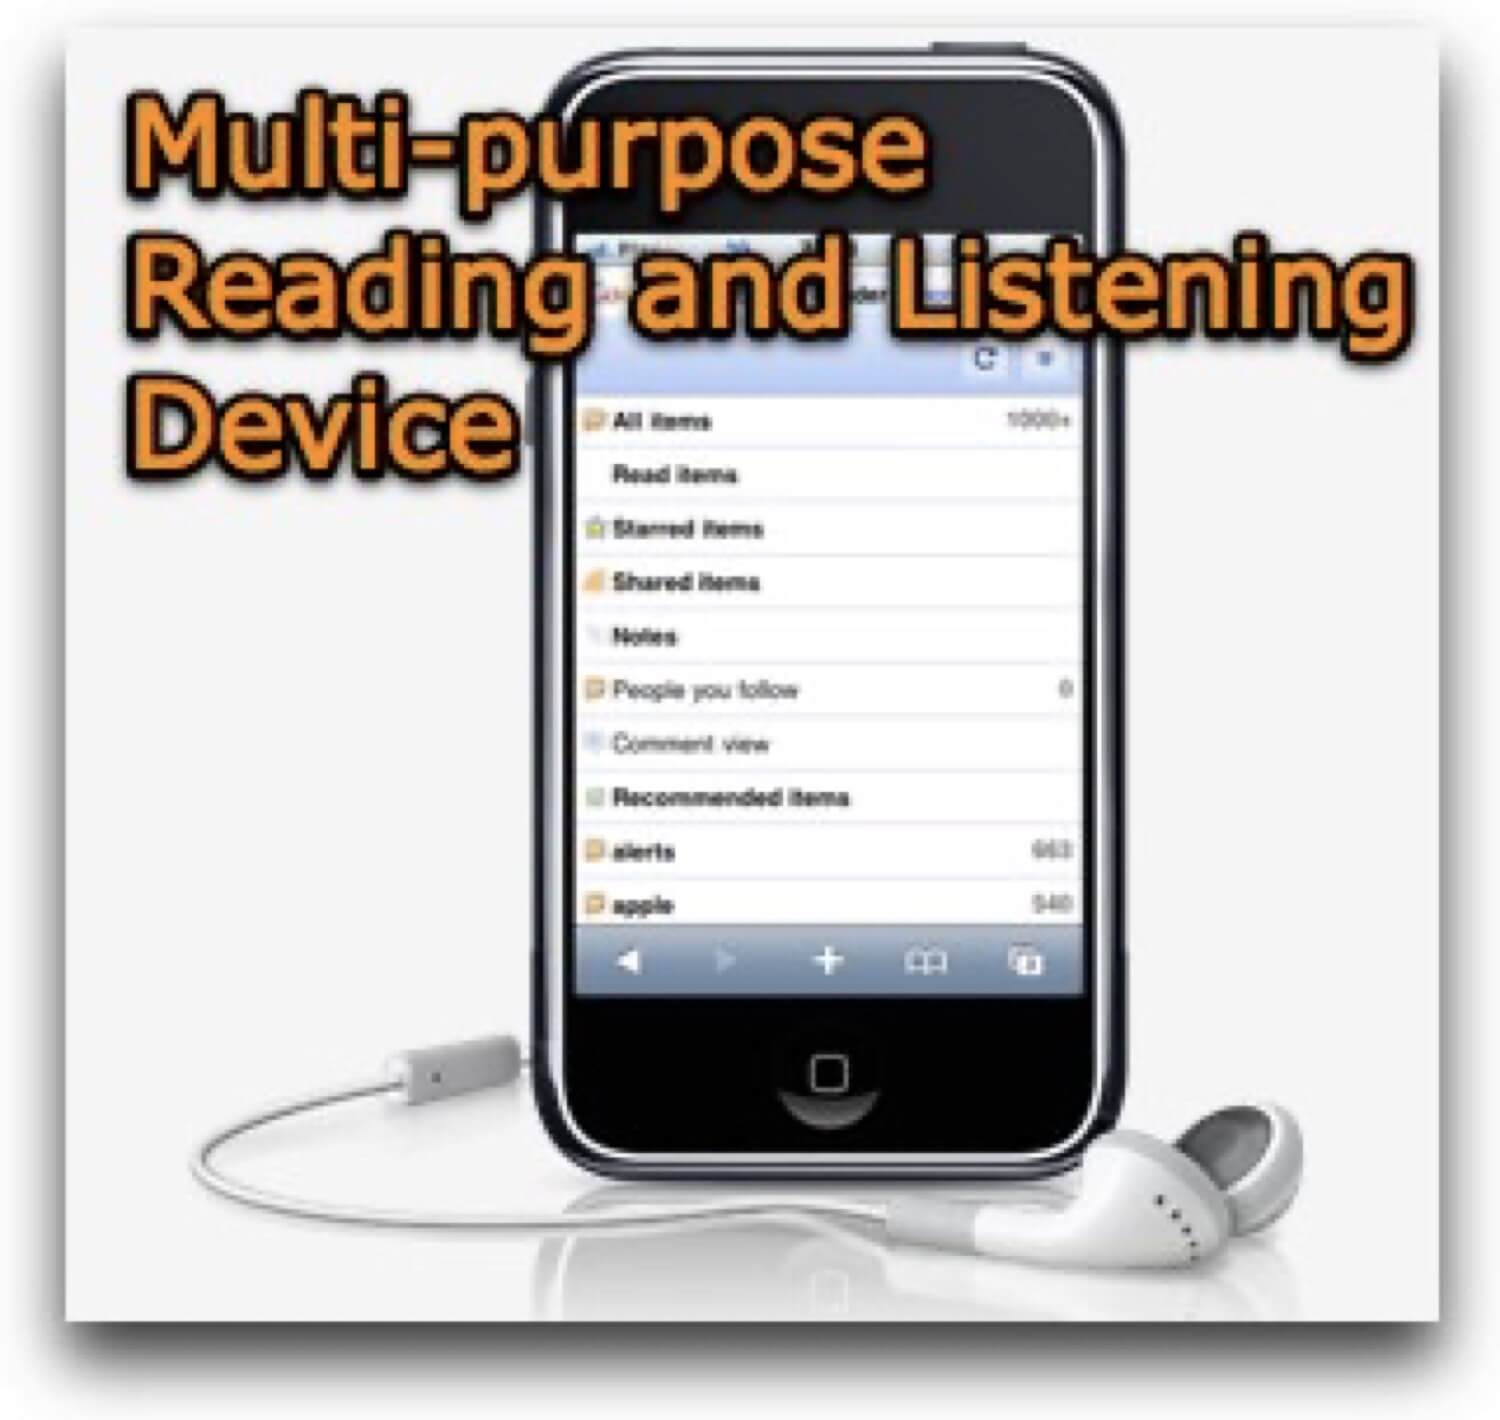 Power of e-readers and audiobooks - productivity for the impatient